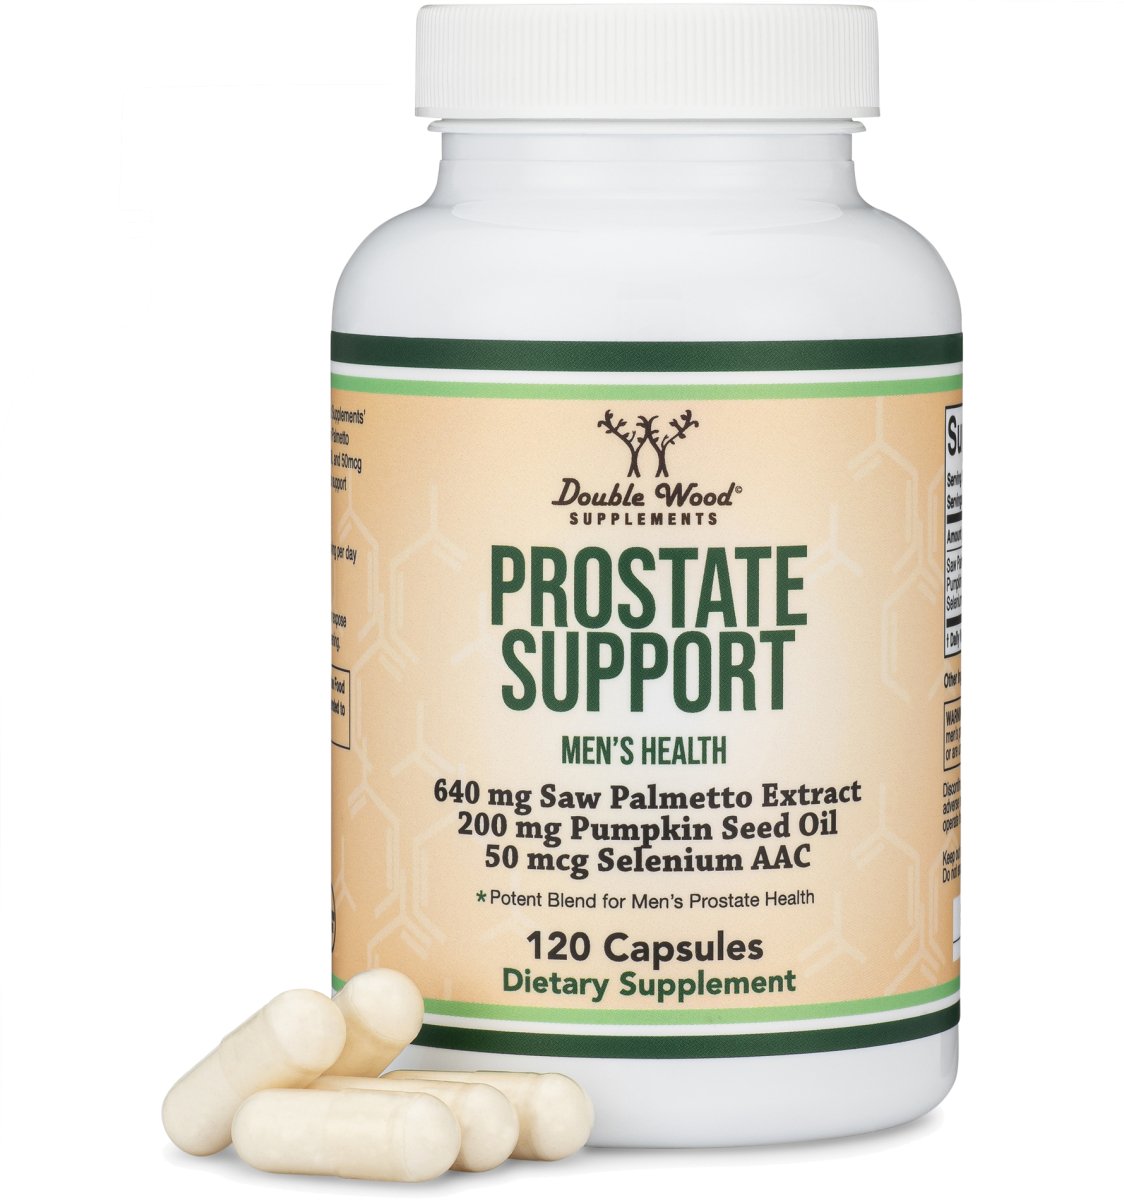 Prostate Support Supplement Double Pack - Double Wood Supplements